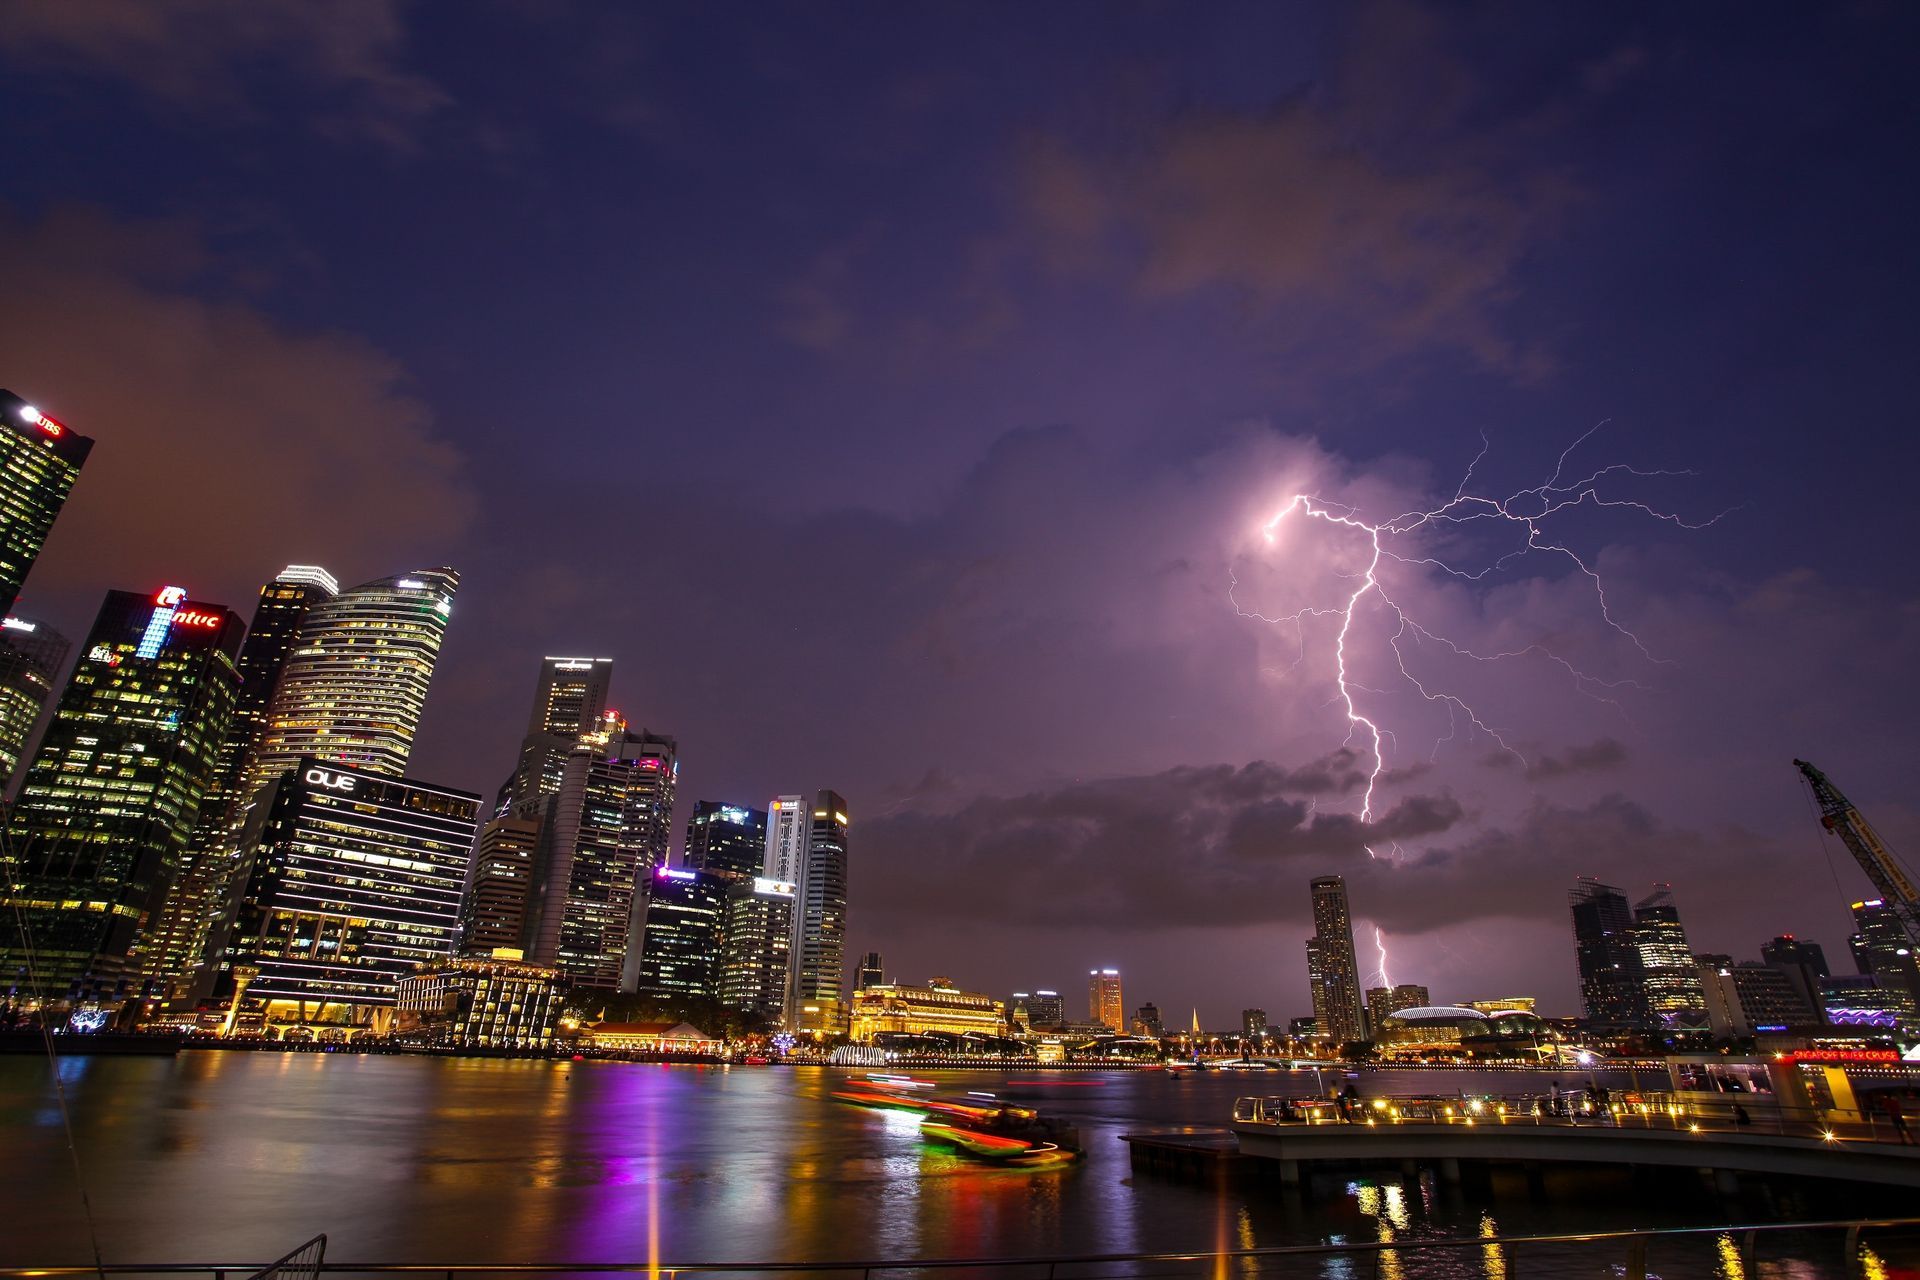 Lightning strike in a large city, which is not a problem with a Transient Voltage Surge Suppressor